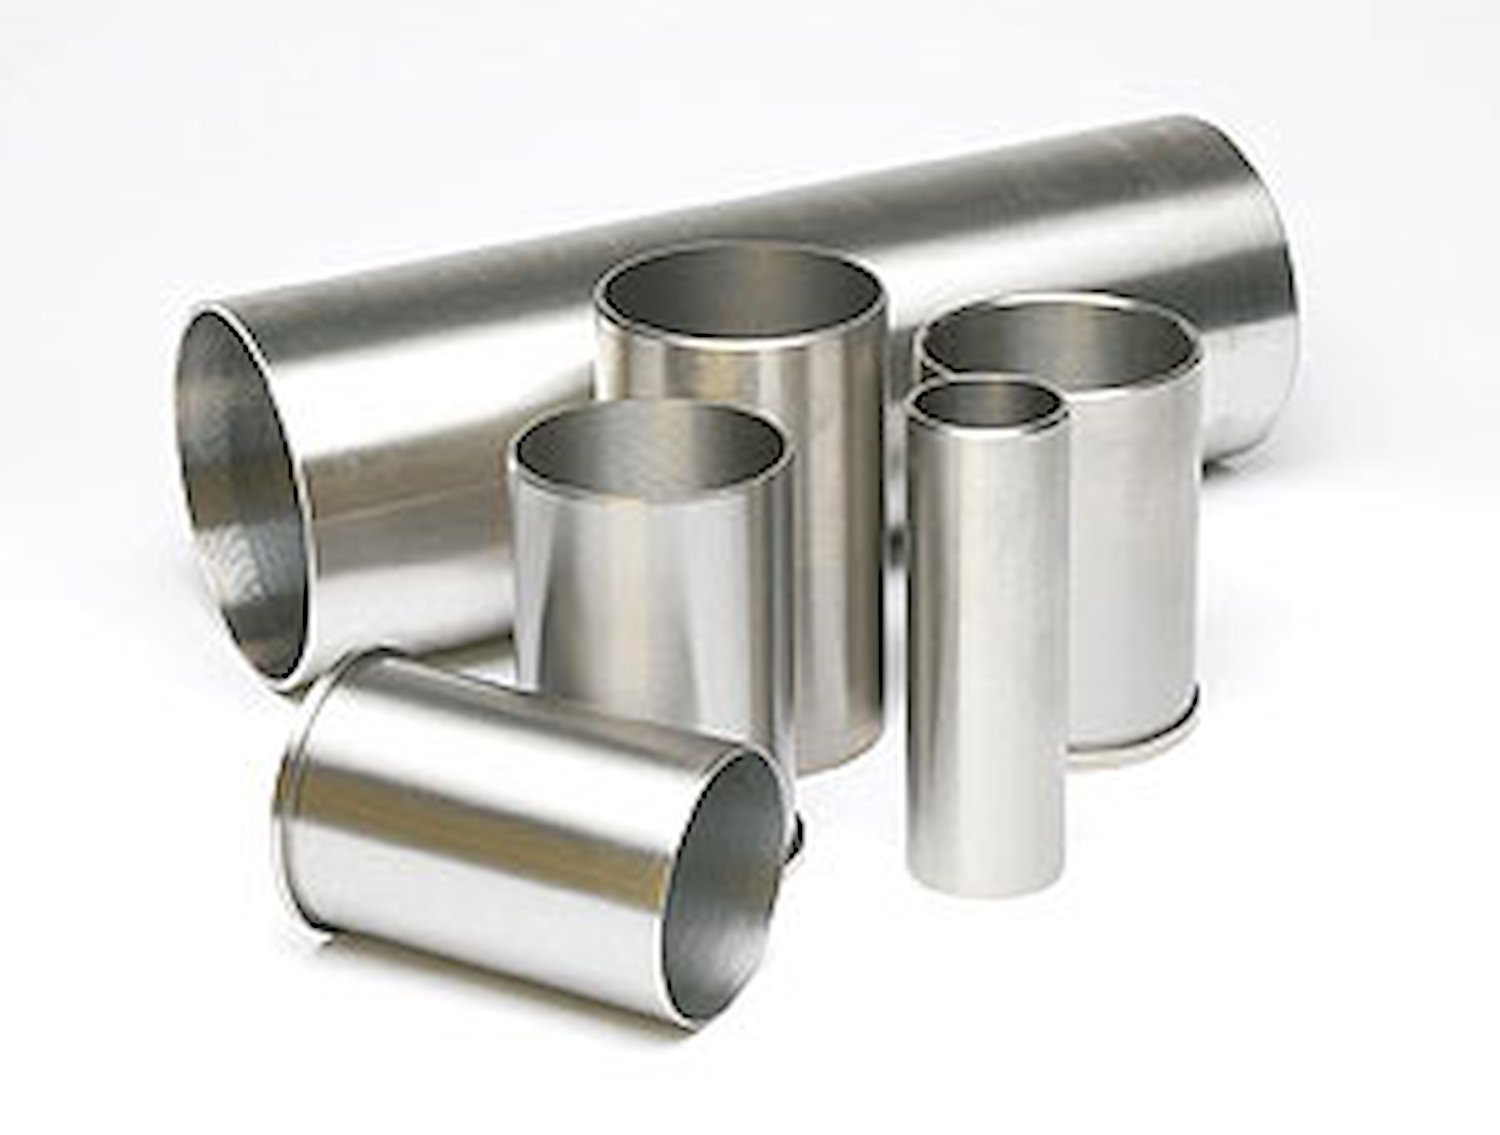 Cylinder Sleeve Bore: 2.6770" Length: 5-3/4" Wall Thickness: 3/32"